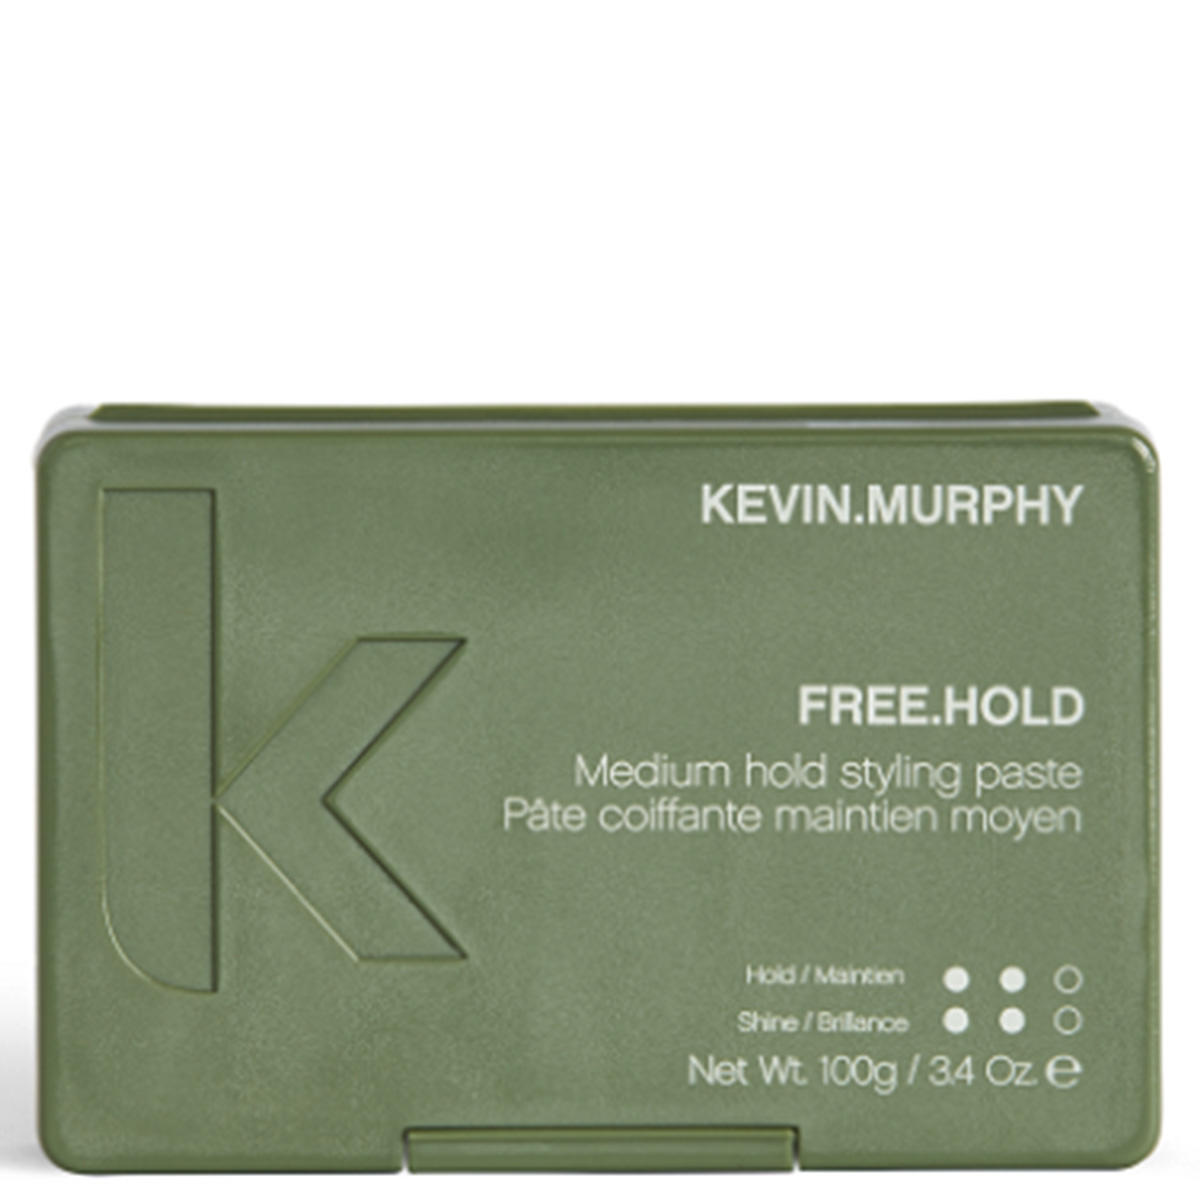 KEVIN.MURPHY FREE.HOLD 100 g - 1